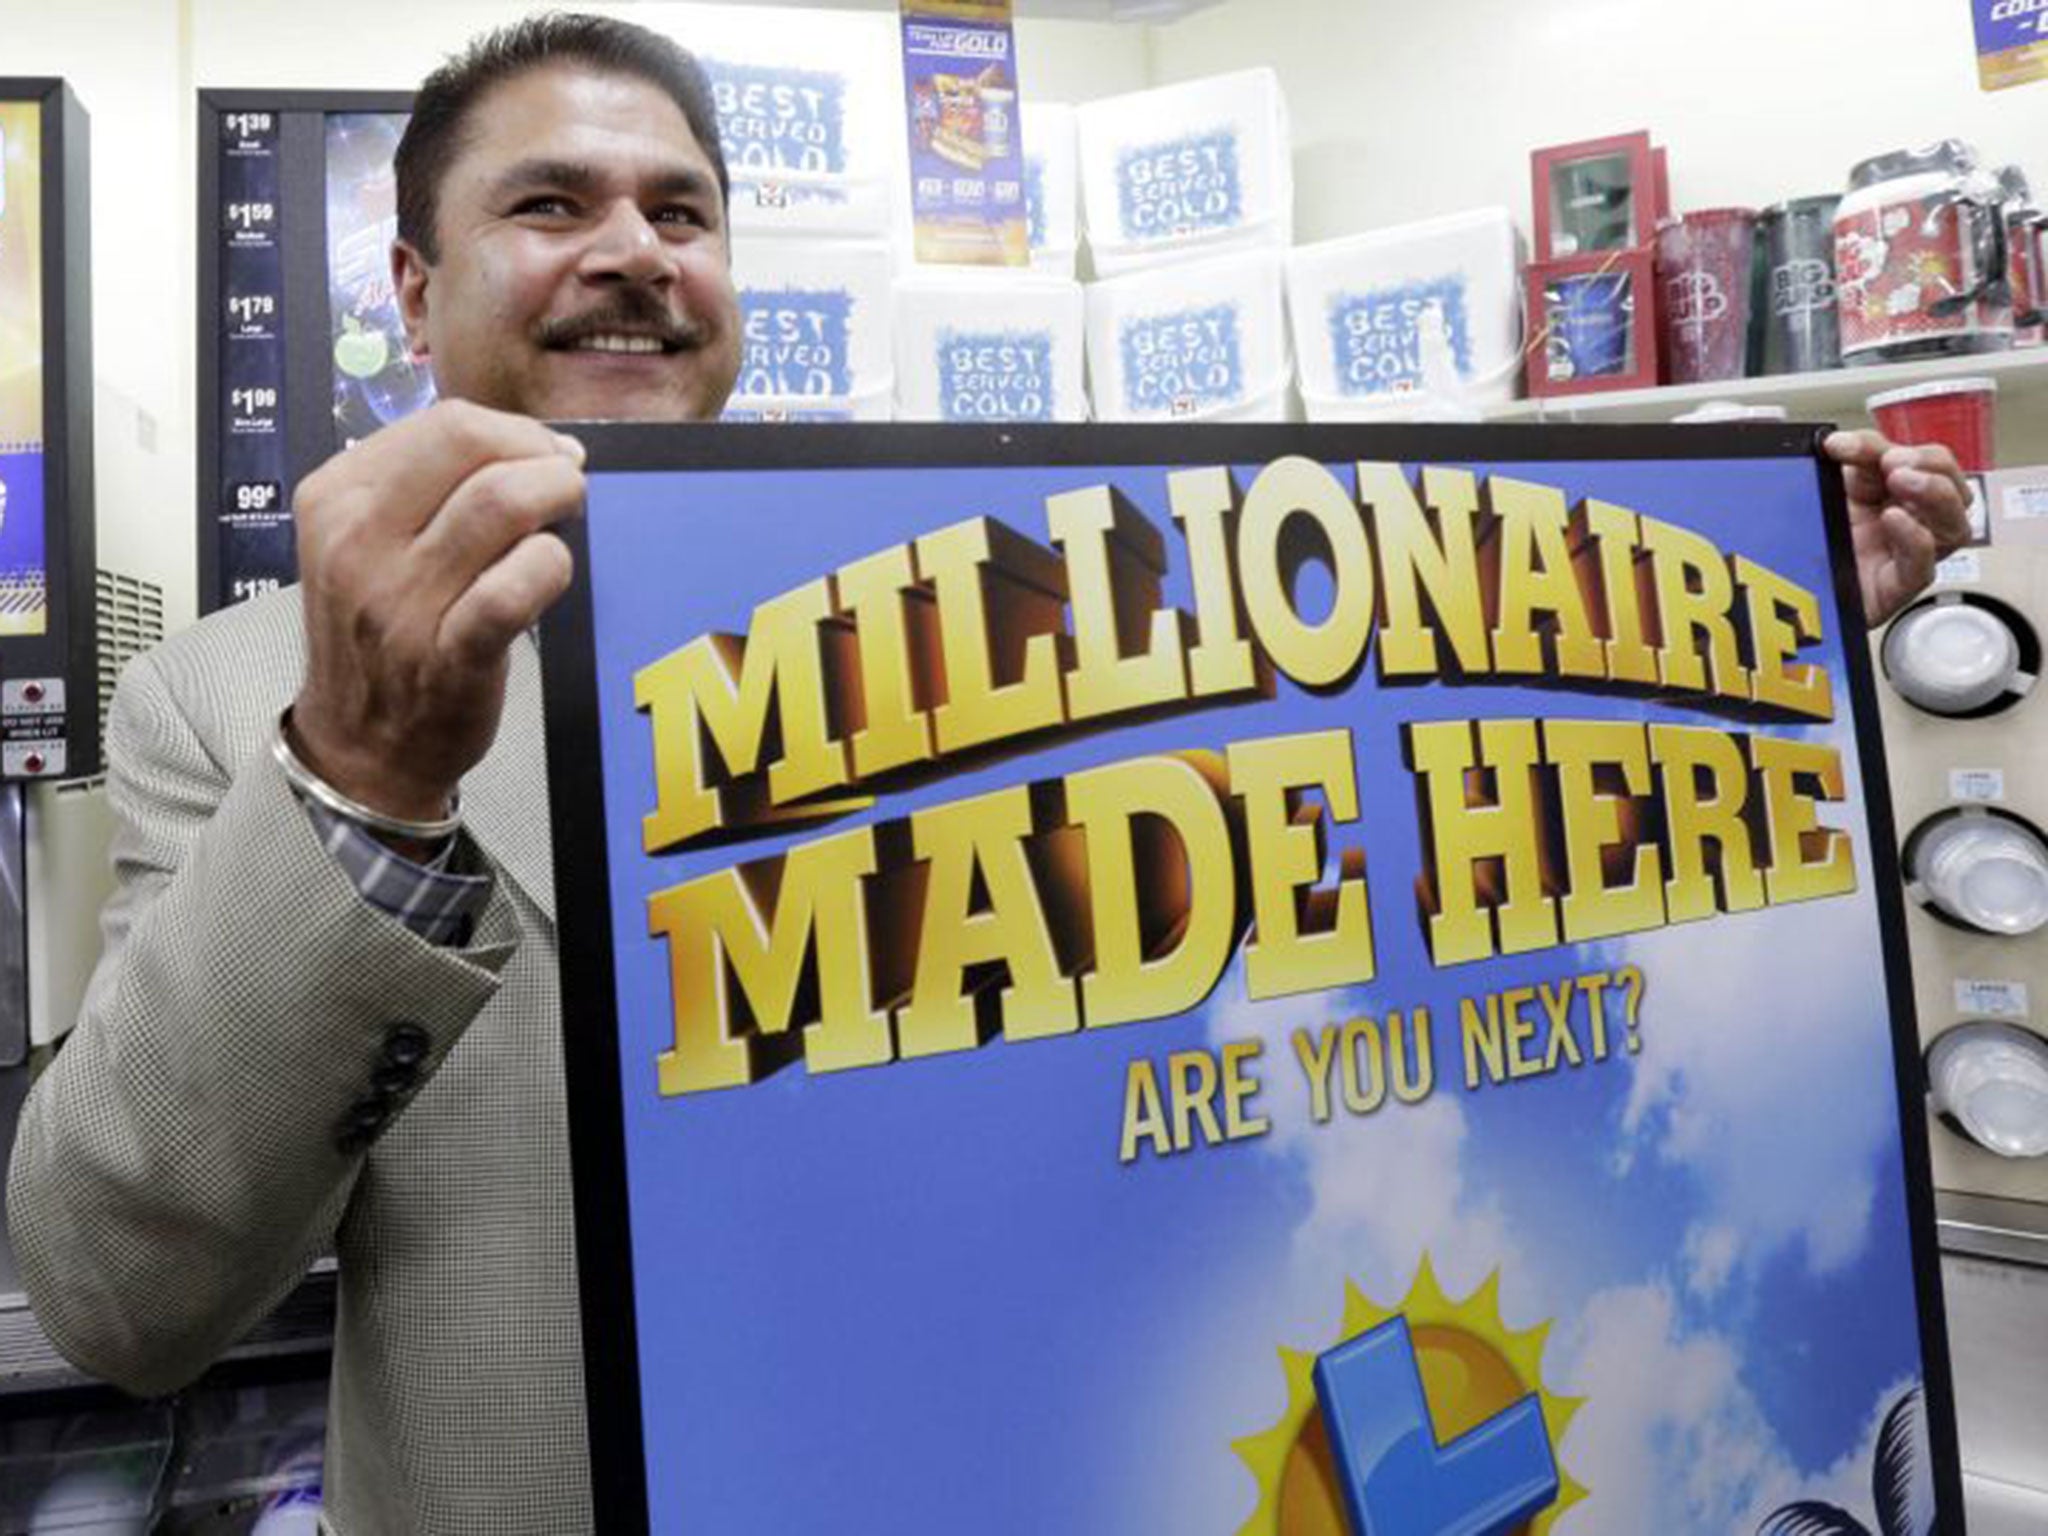 Balbir Atwal is the owner of the 7-Eleven store that sold one of the winning Powerball lottery tickets